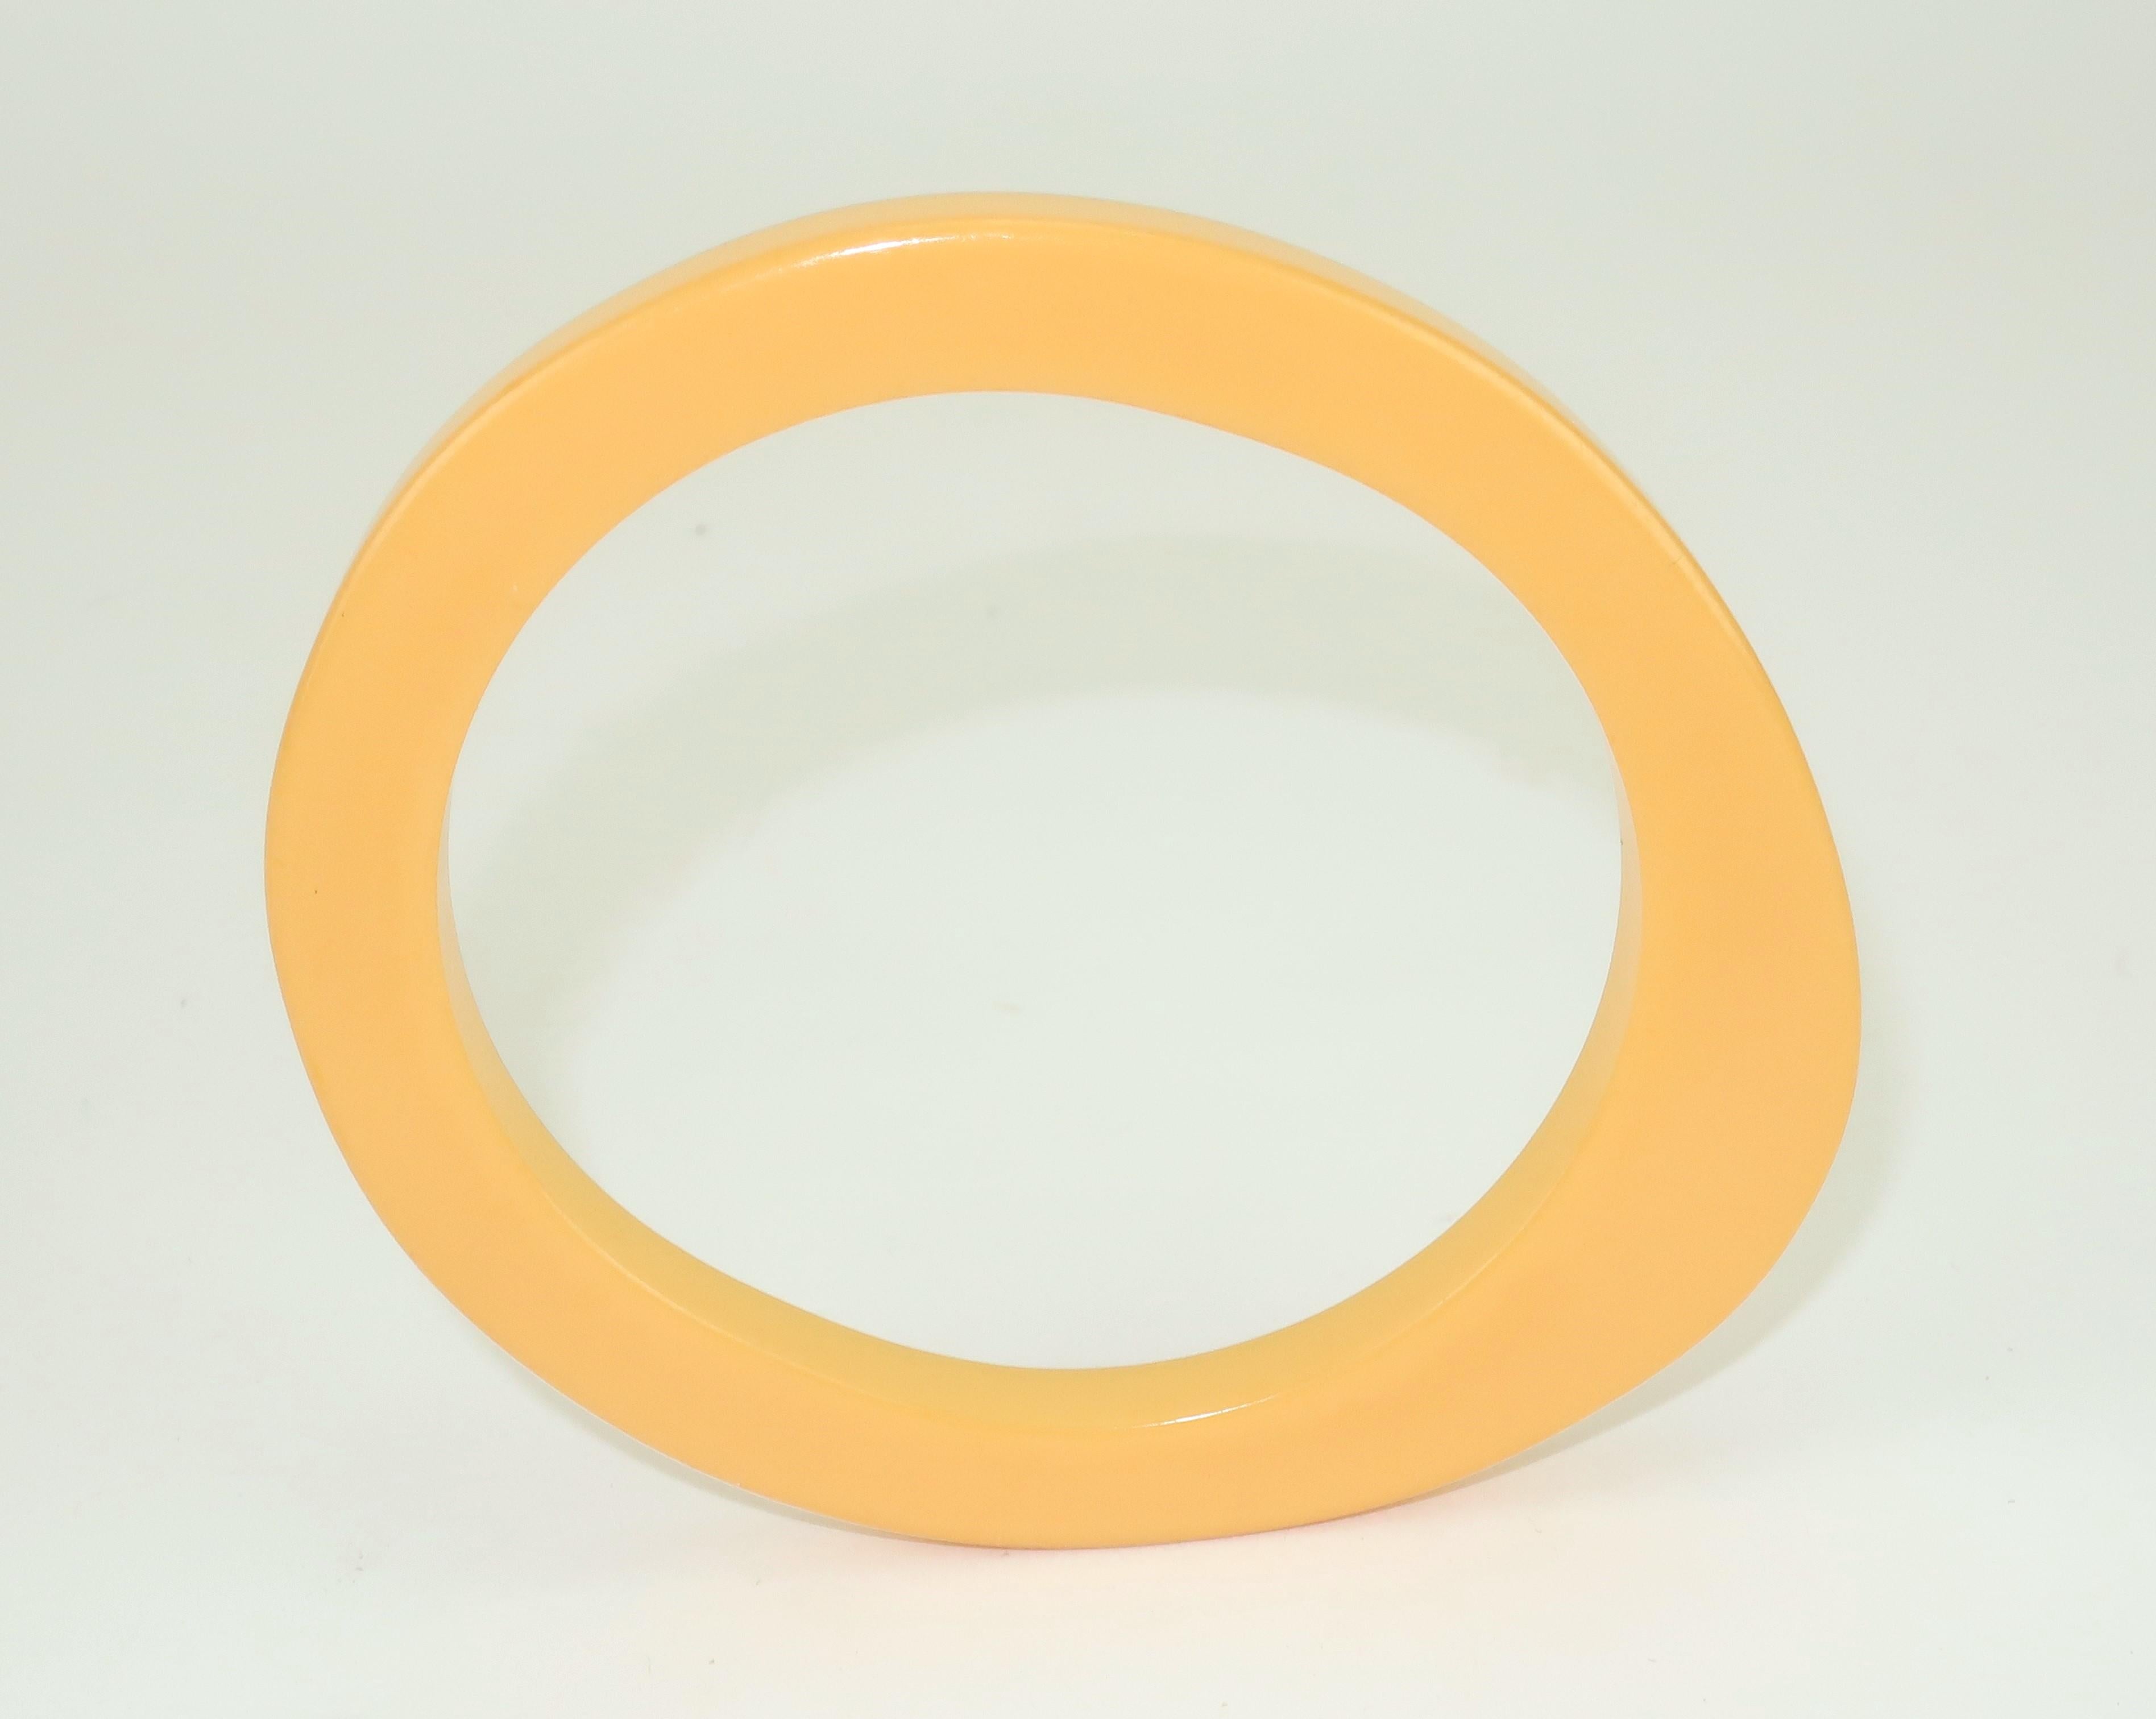 Breakfast anyone?  1940's Bakelite bracelet in a unique and eye catching oblong shape reminiscent of a fried egg which goes hand in hand with the yellowish color known as 'egg yolk'.  The skinny silhouette is fun on its own or equally stylish